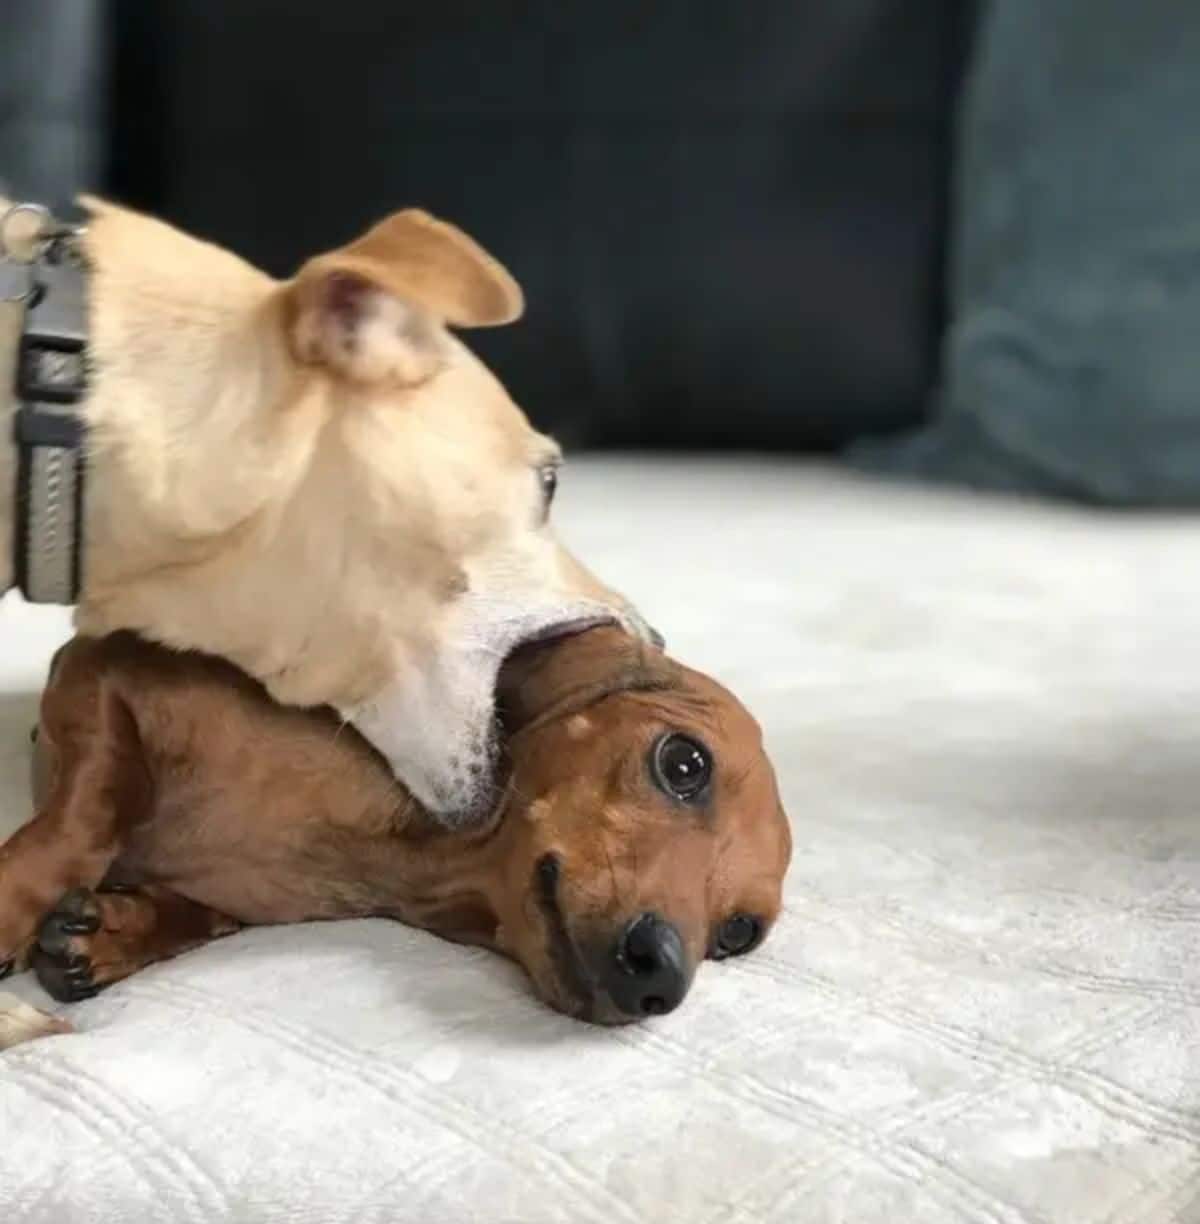 brown dachshund laying on white bed with light brown dog holding the side of the dachshund's head in its mouth